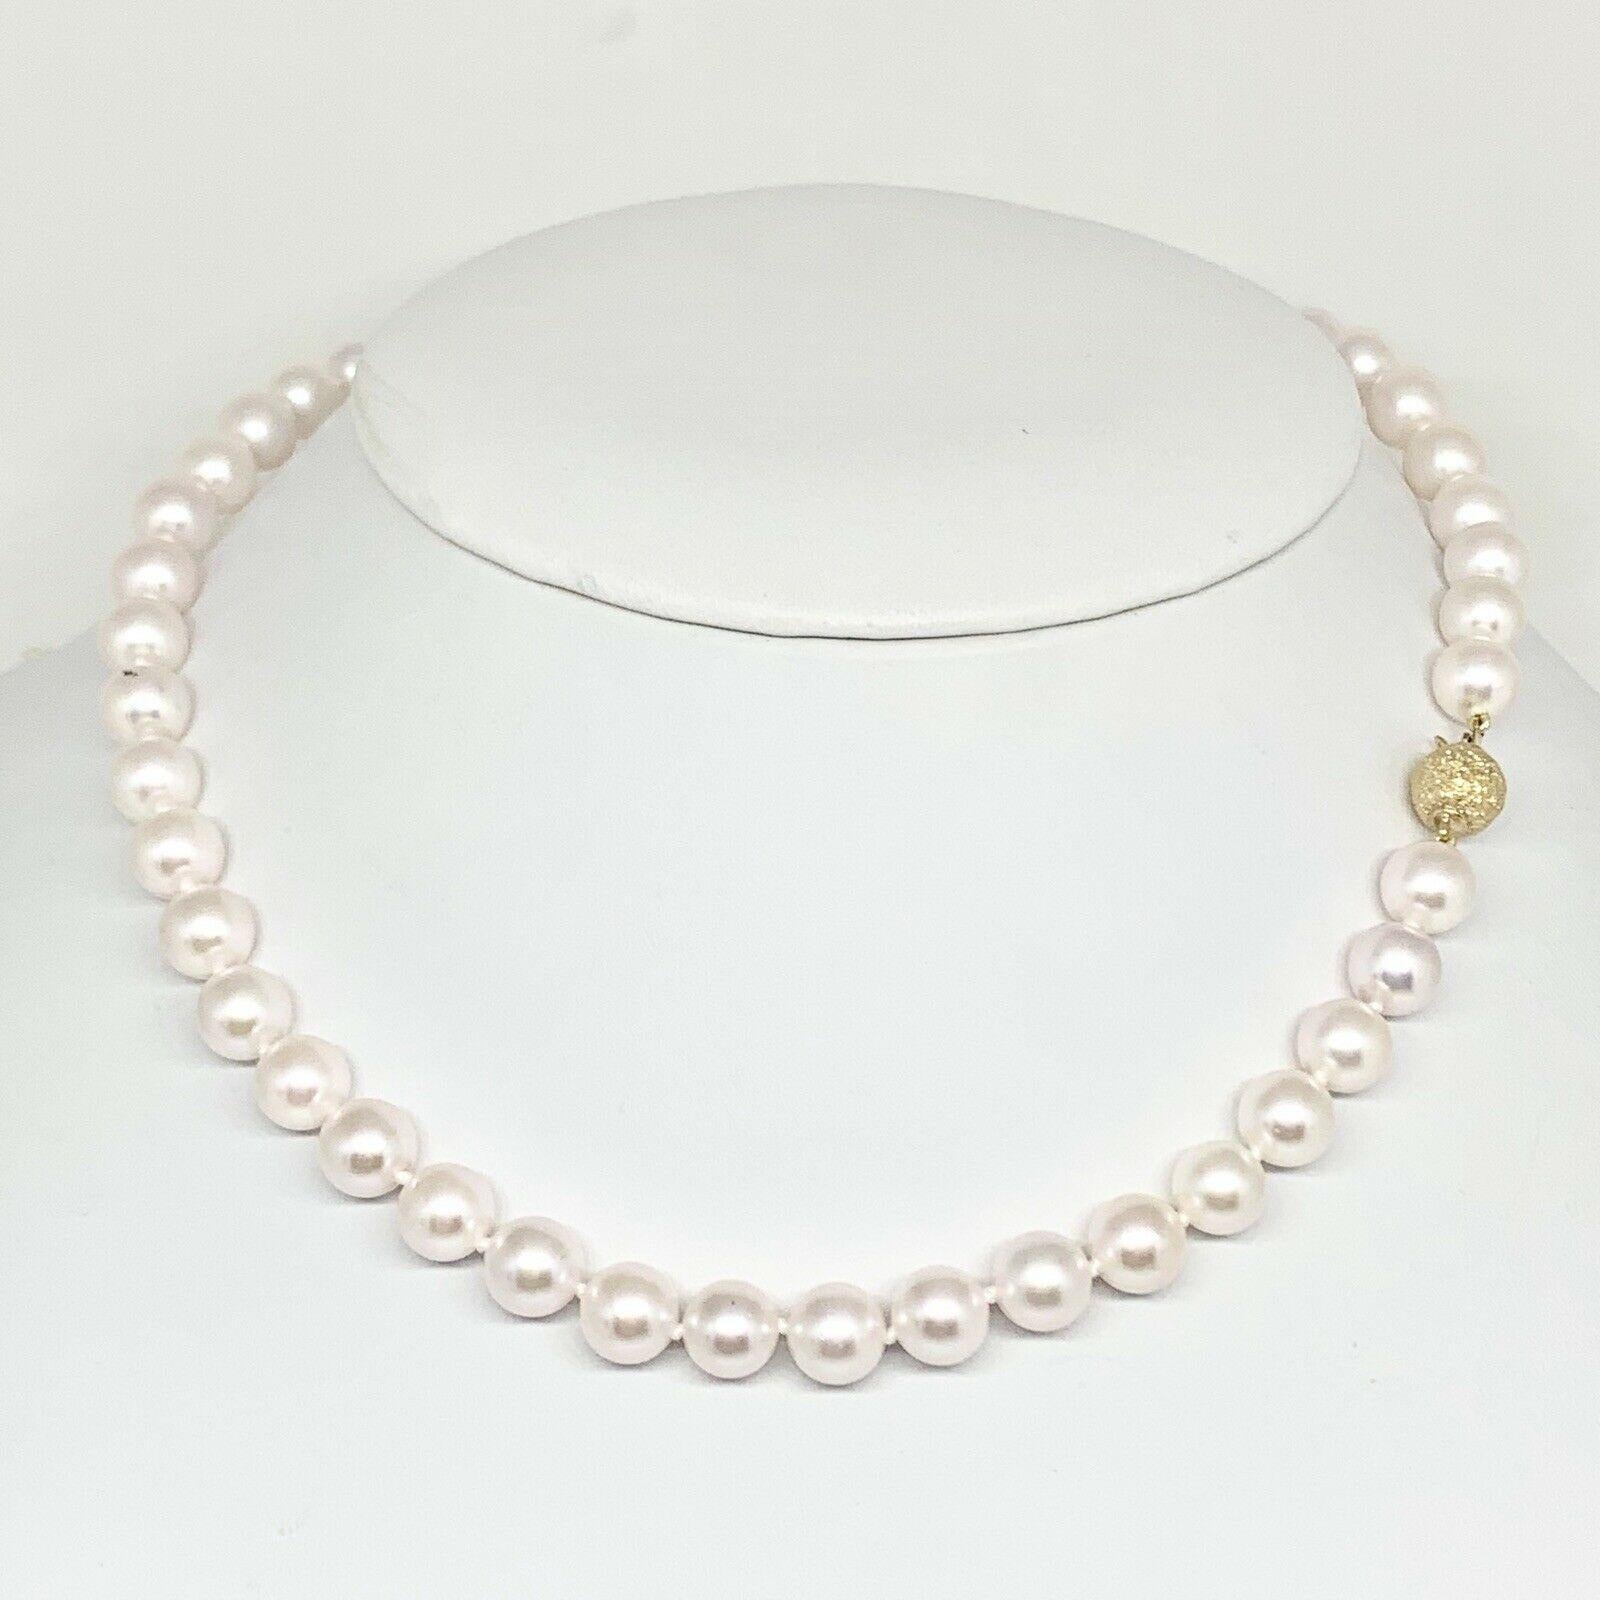 14k gold necklace for women